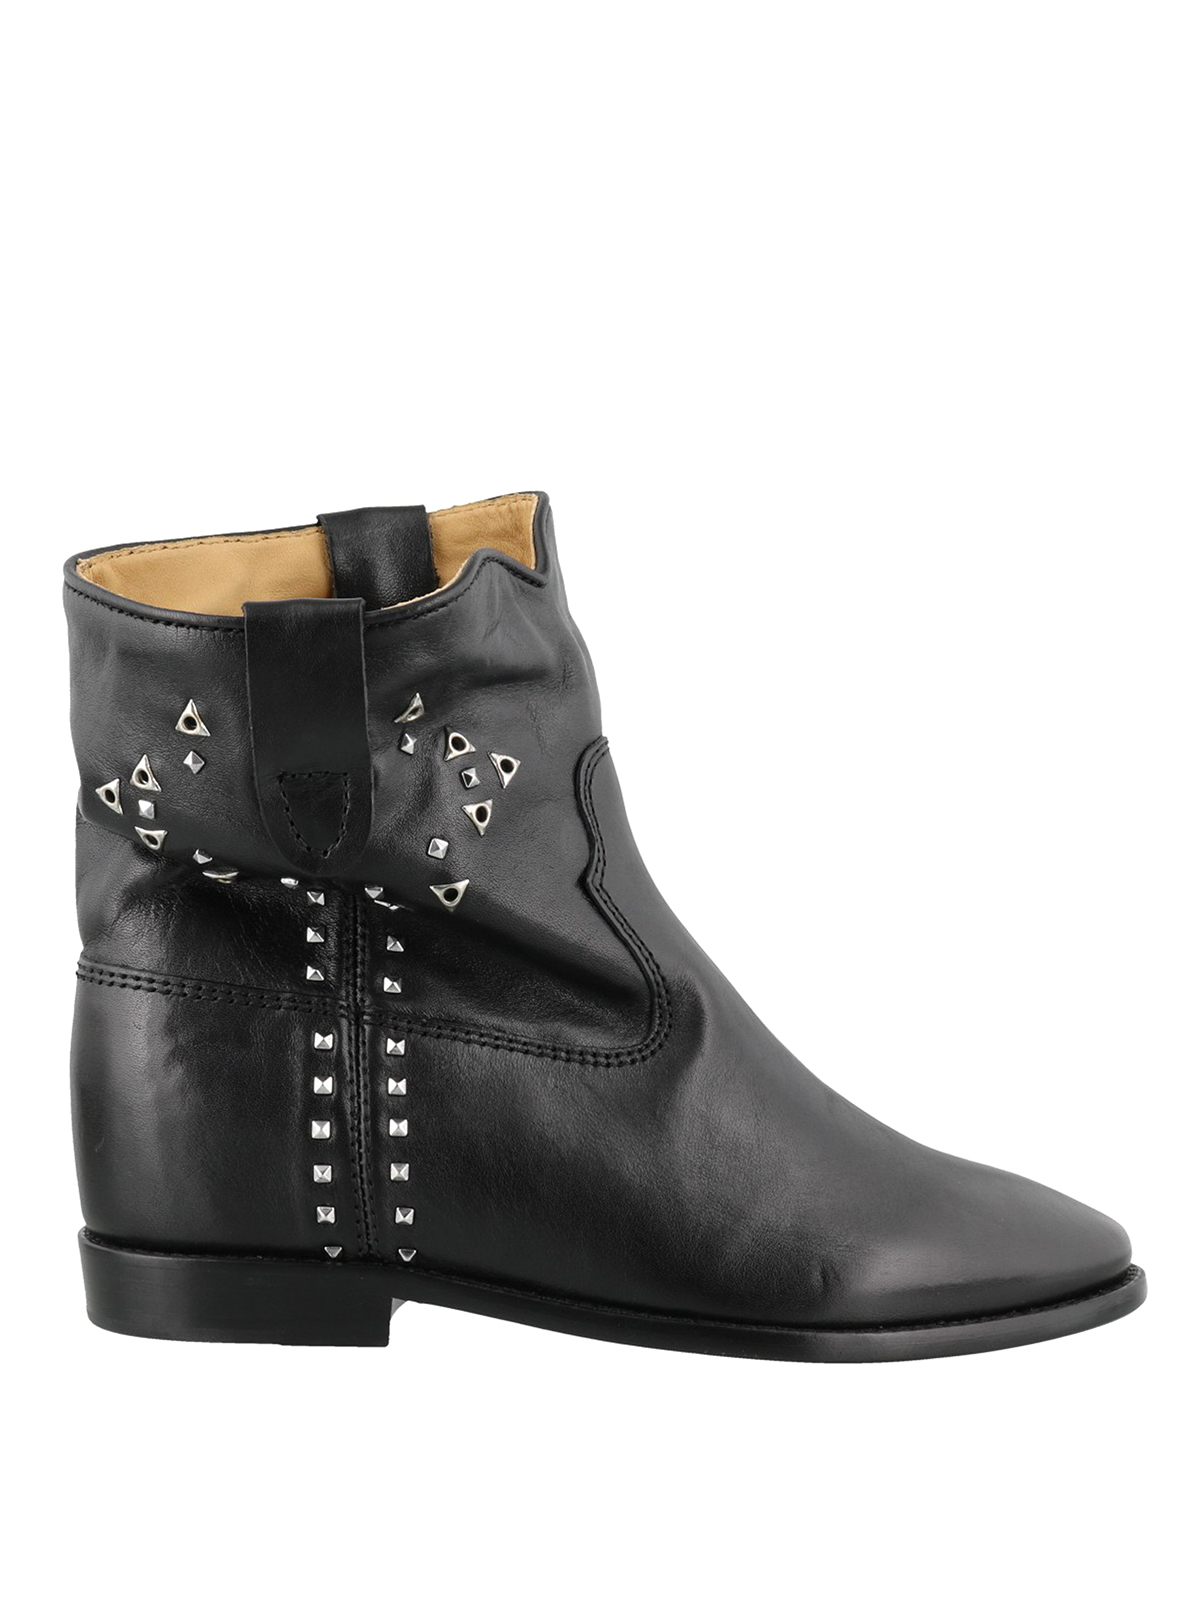 studded black leather booties